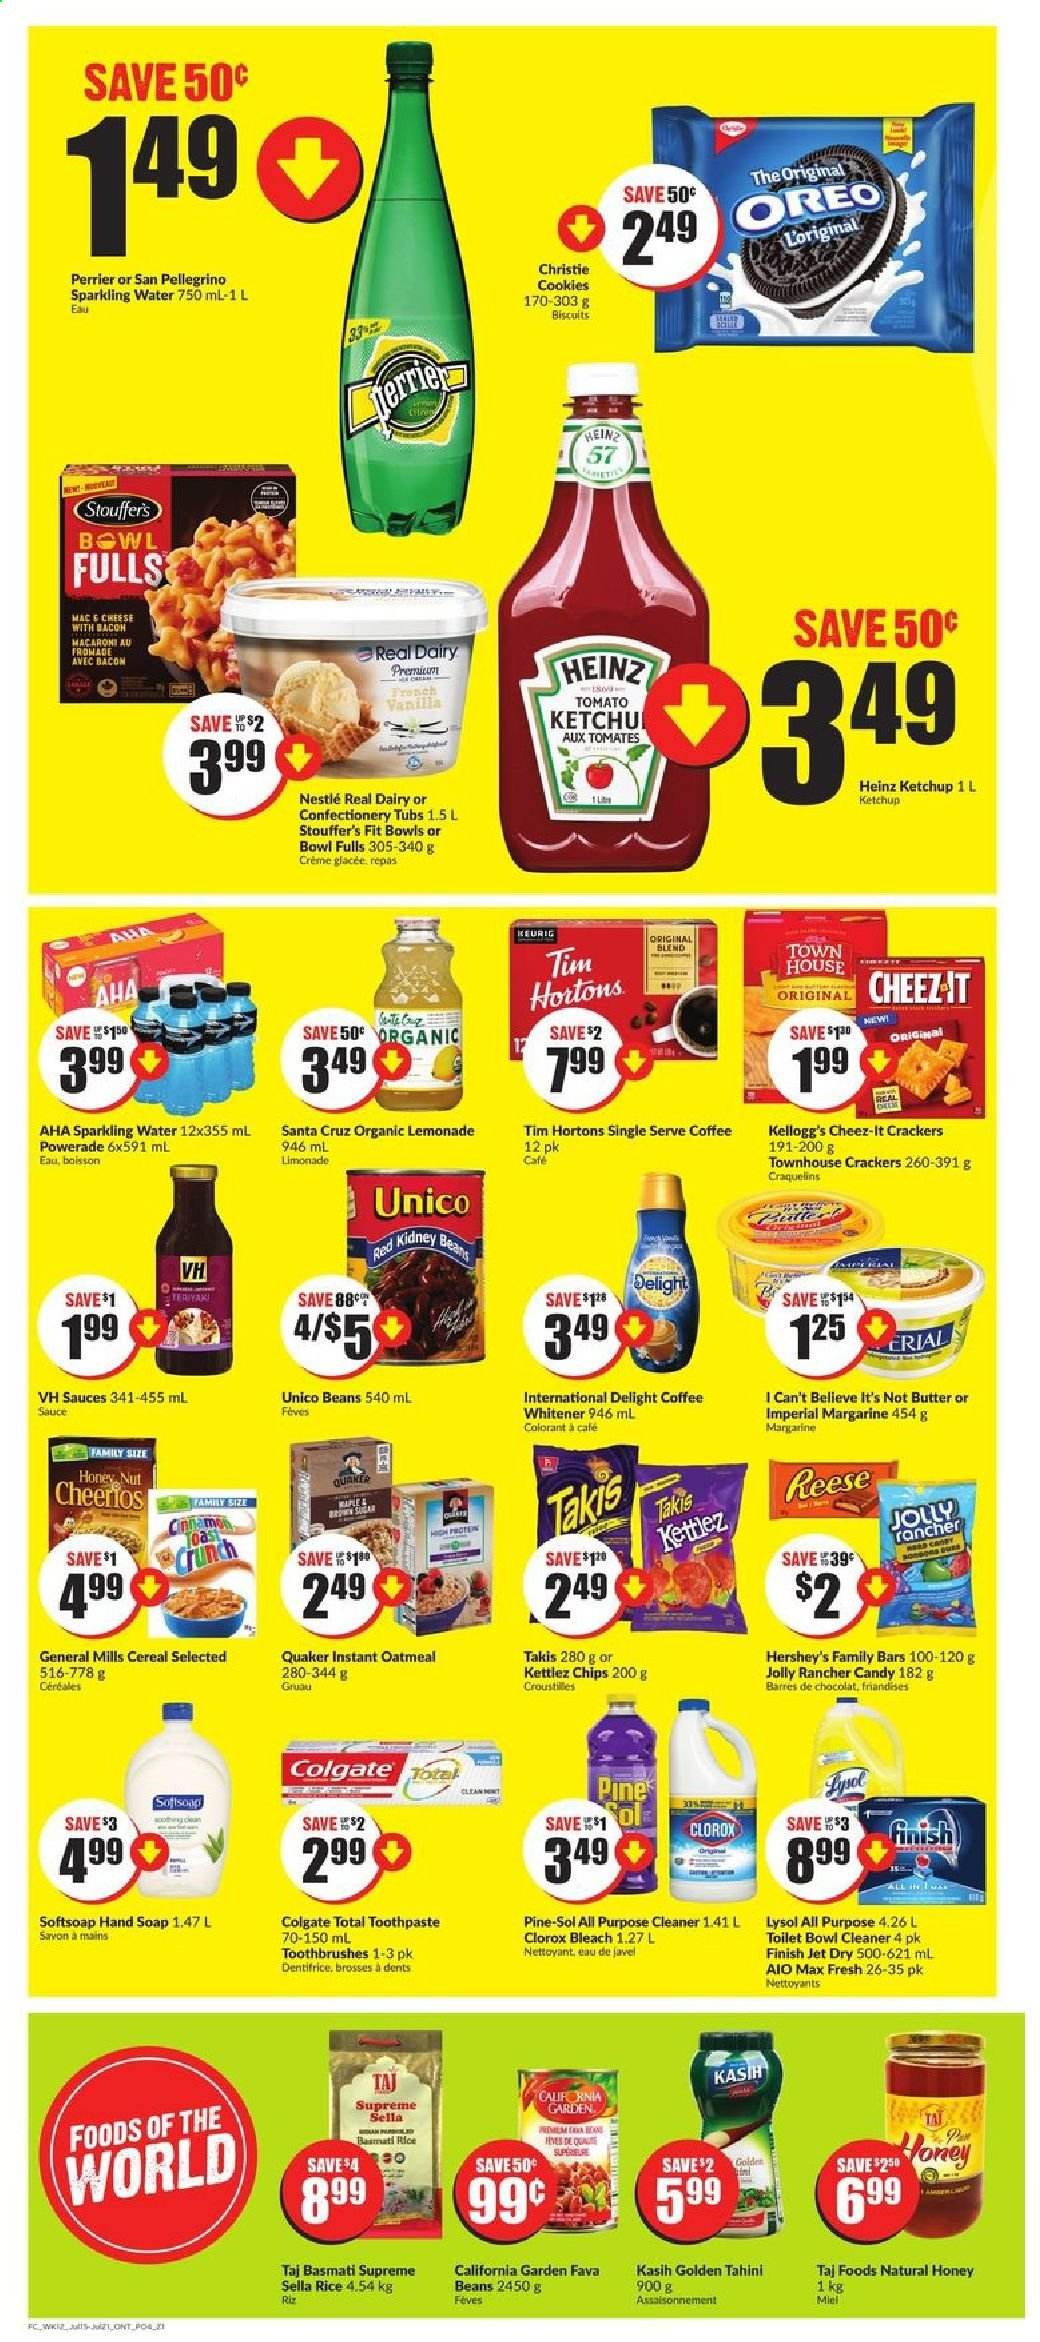 thumbnail - FreshCo. Flyer - July 15, 2021 - July 21, 2021 - Sales products - fava beans, macaroni, Quaker, cheese, Oreo, butter, margarine, I Can't Believe It's Not Butter, Hershey's, Stouffer's, cookies, crackers, Kellogg's, biscuit, Cheez-It, oatmeal, Heinz, kidney beans, cereals, Cheerios, basmati rice, rice, tahini, lemonade, Powerade, Perrier, sparkling water, San Pellegrino, coffee, Keurig, Nestlé, chips. Page 4.